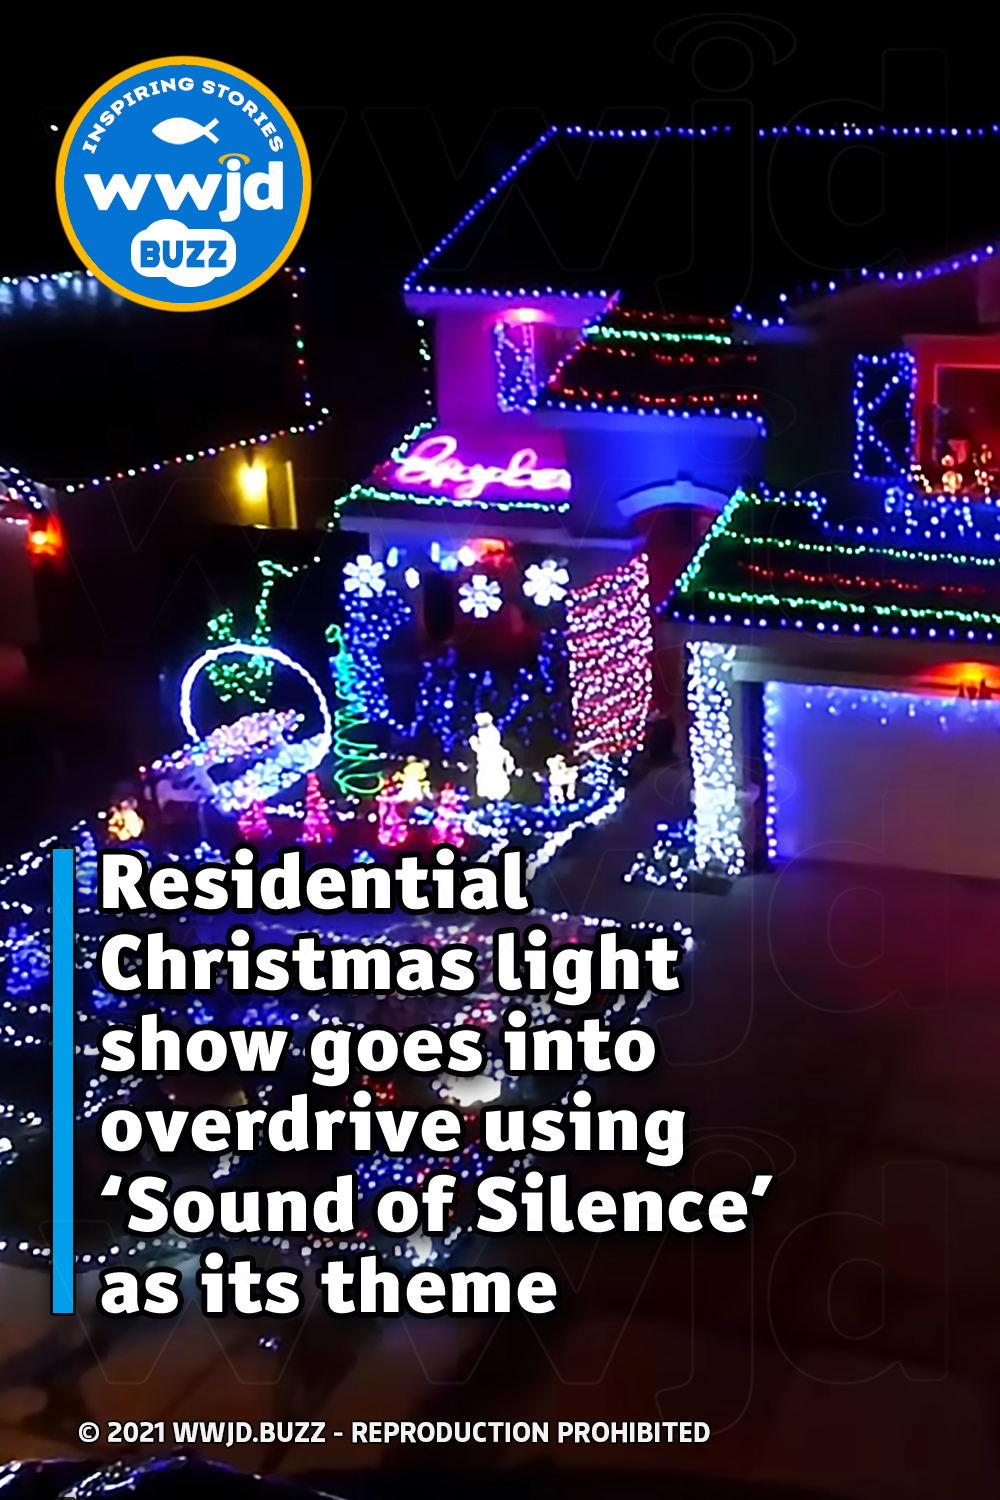 Residential Christmas light show goes into overdrive using ‘Sound of Silence’ as its theme